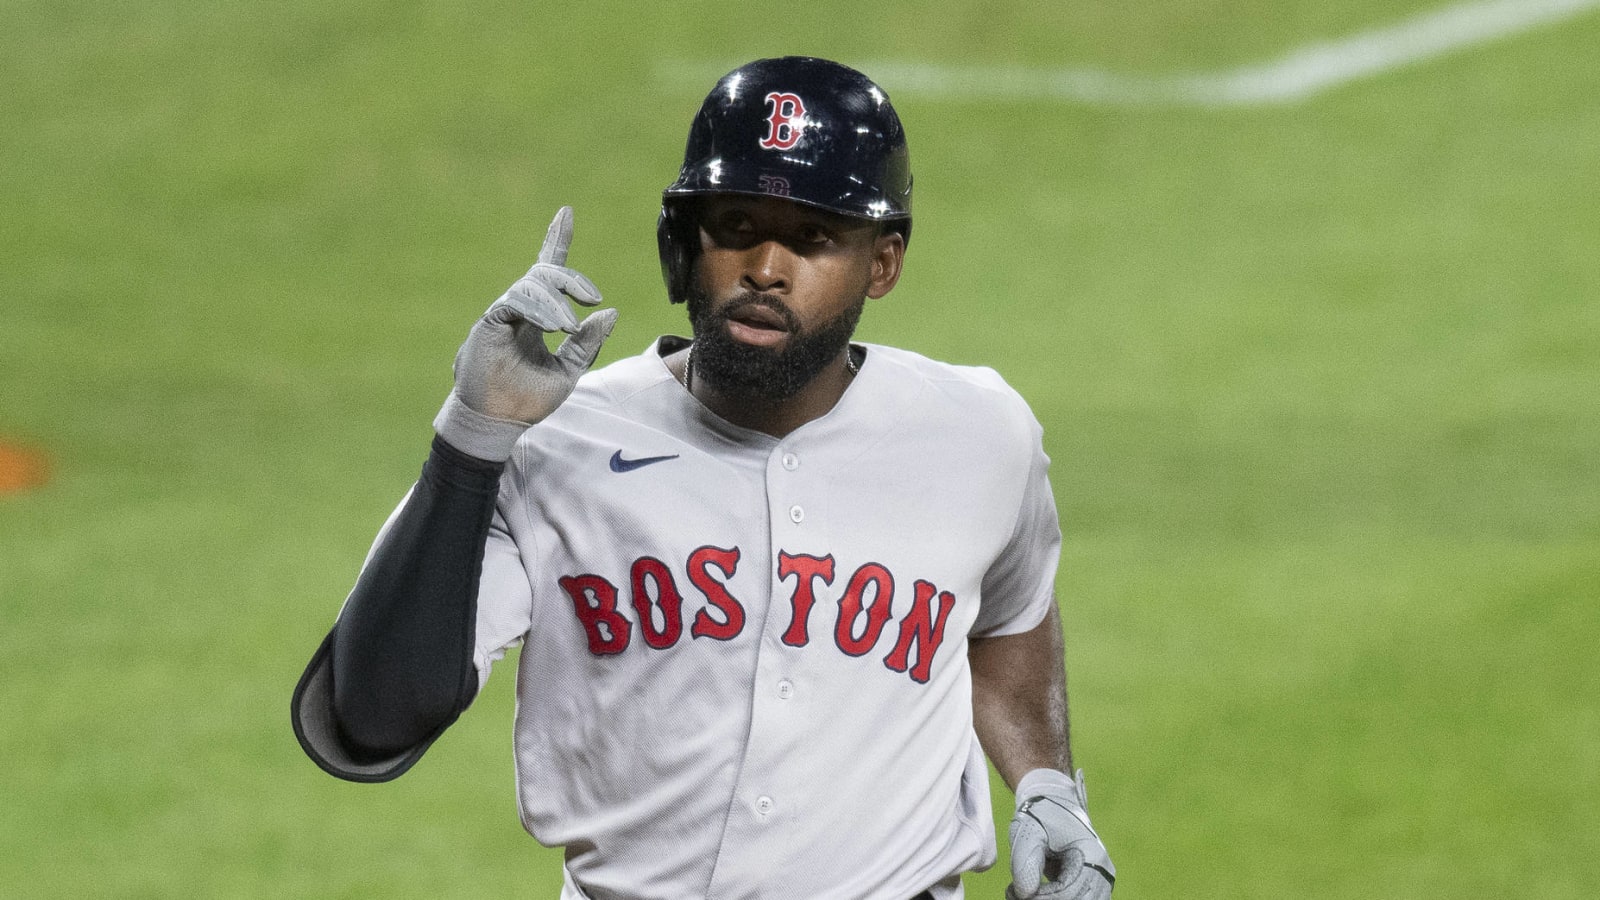 Brewers to sign Jackie Bradley Jr. to a two-year, $24M deal